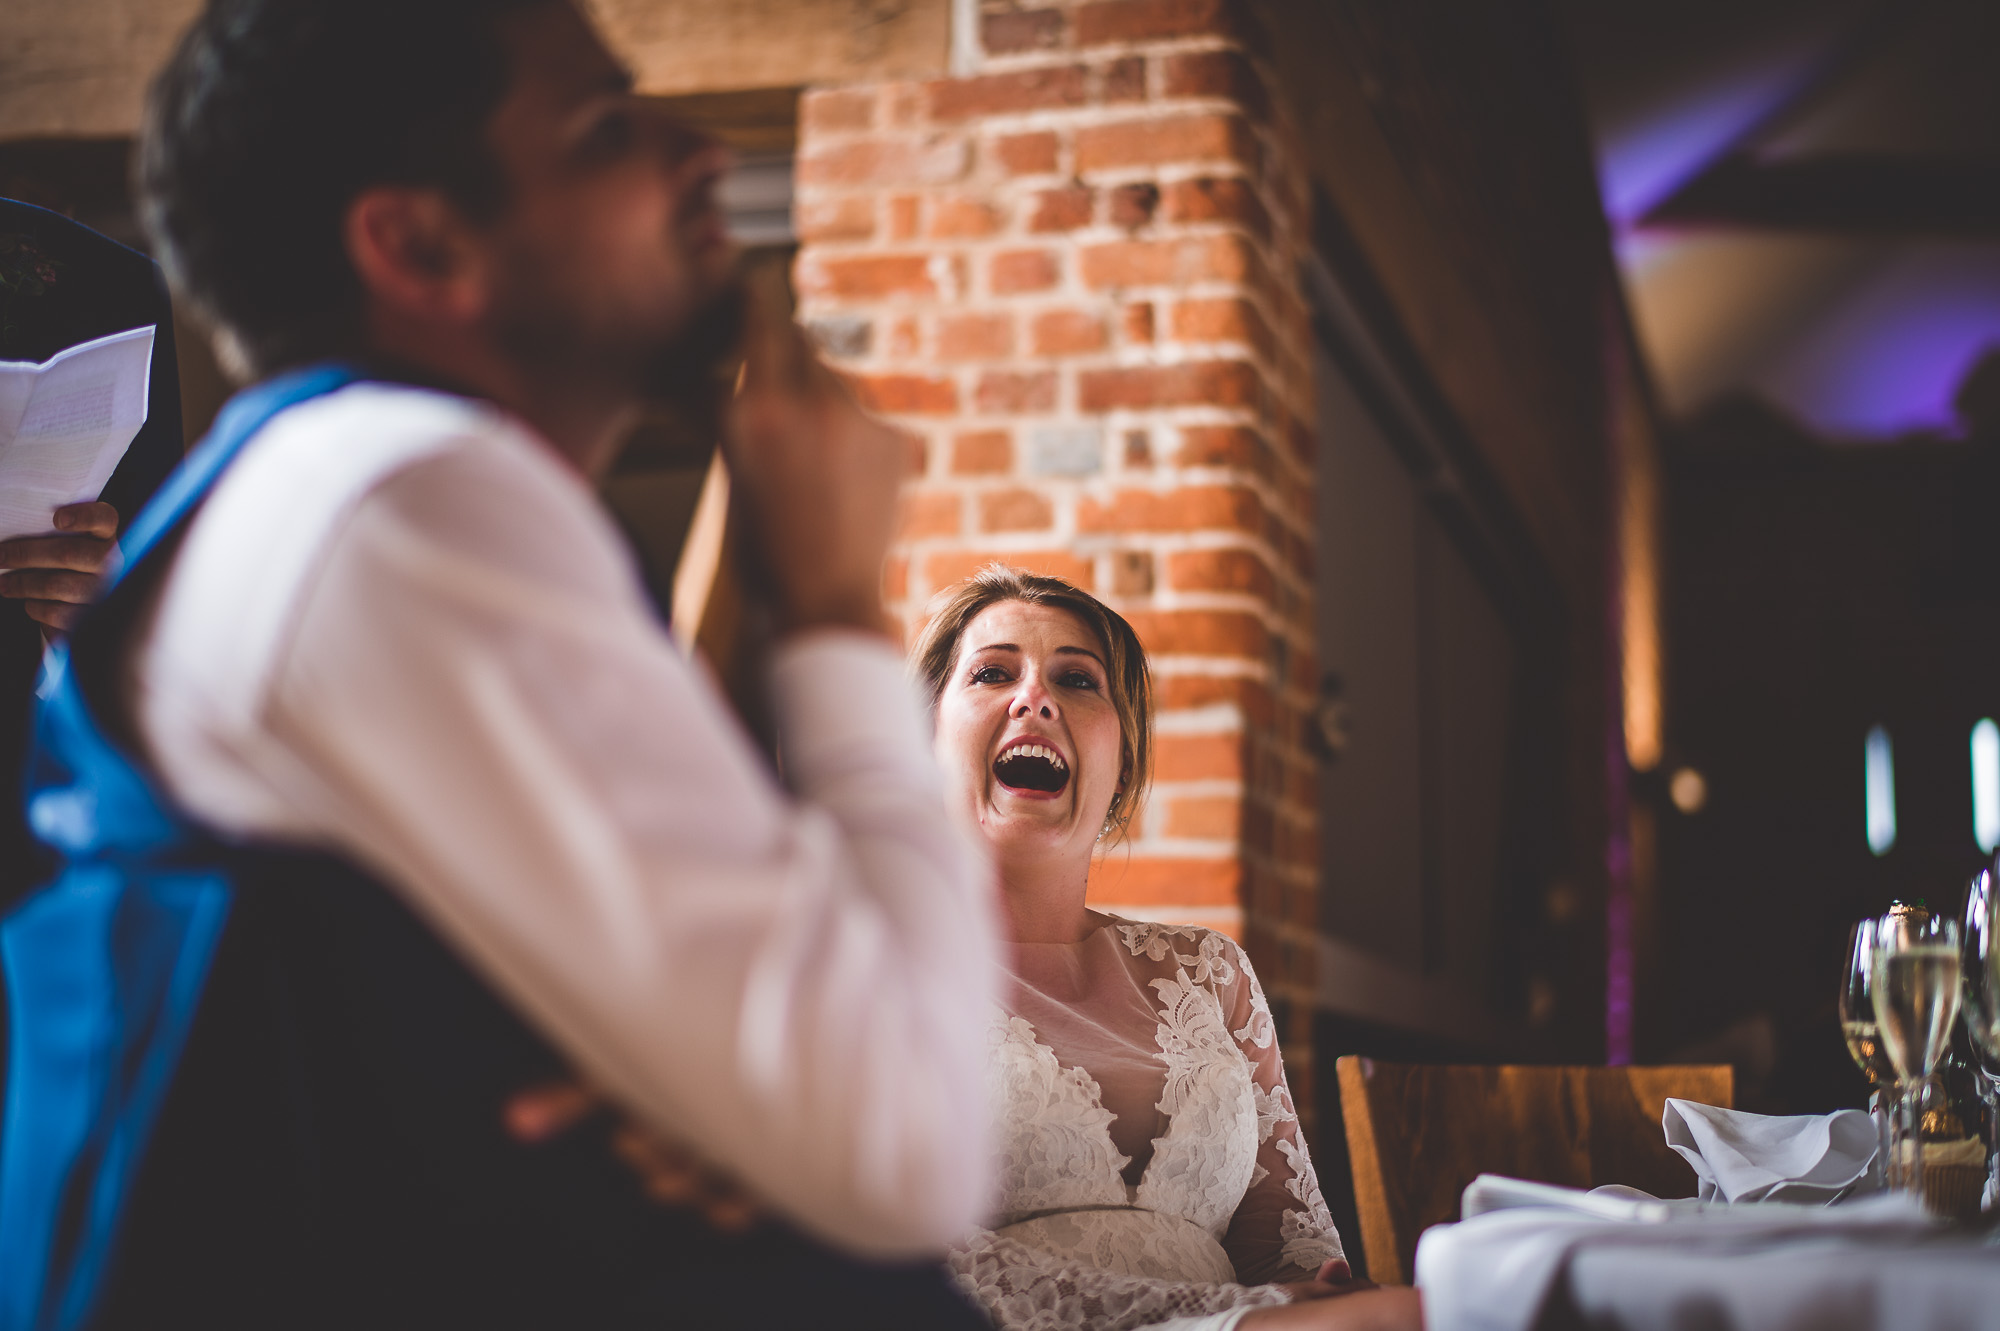 A wedding photographer captures the bride and groom laughing during their speech.